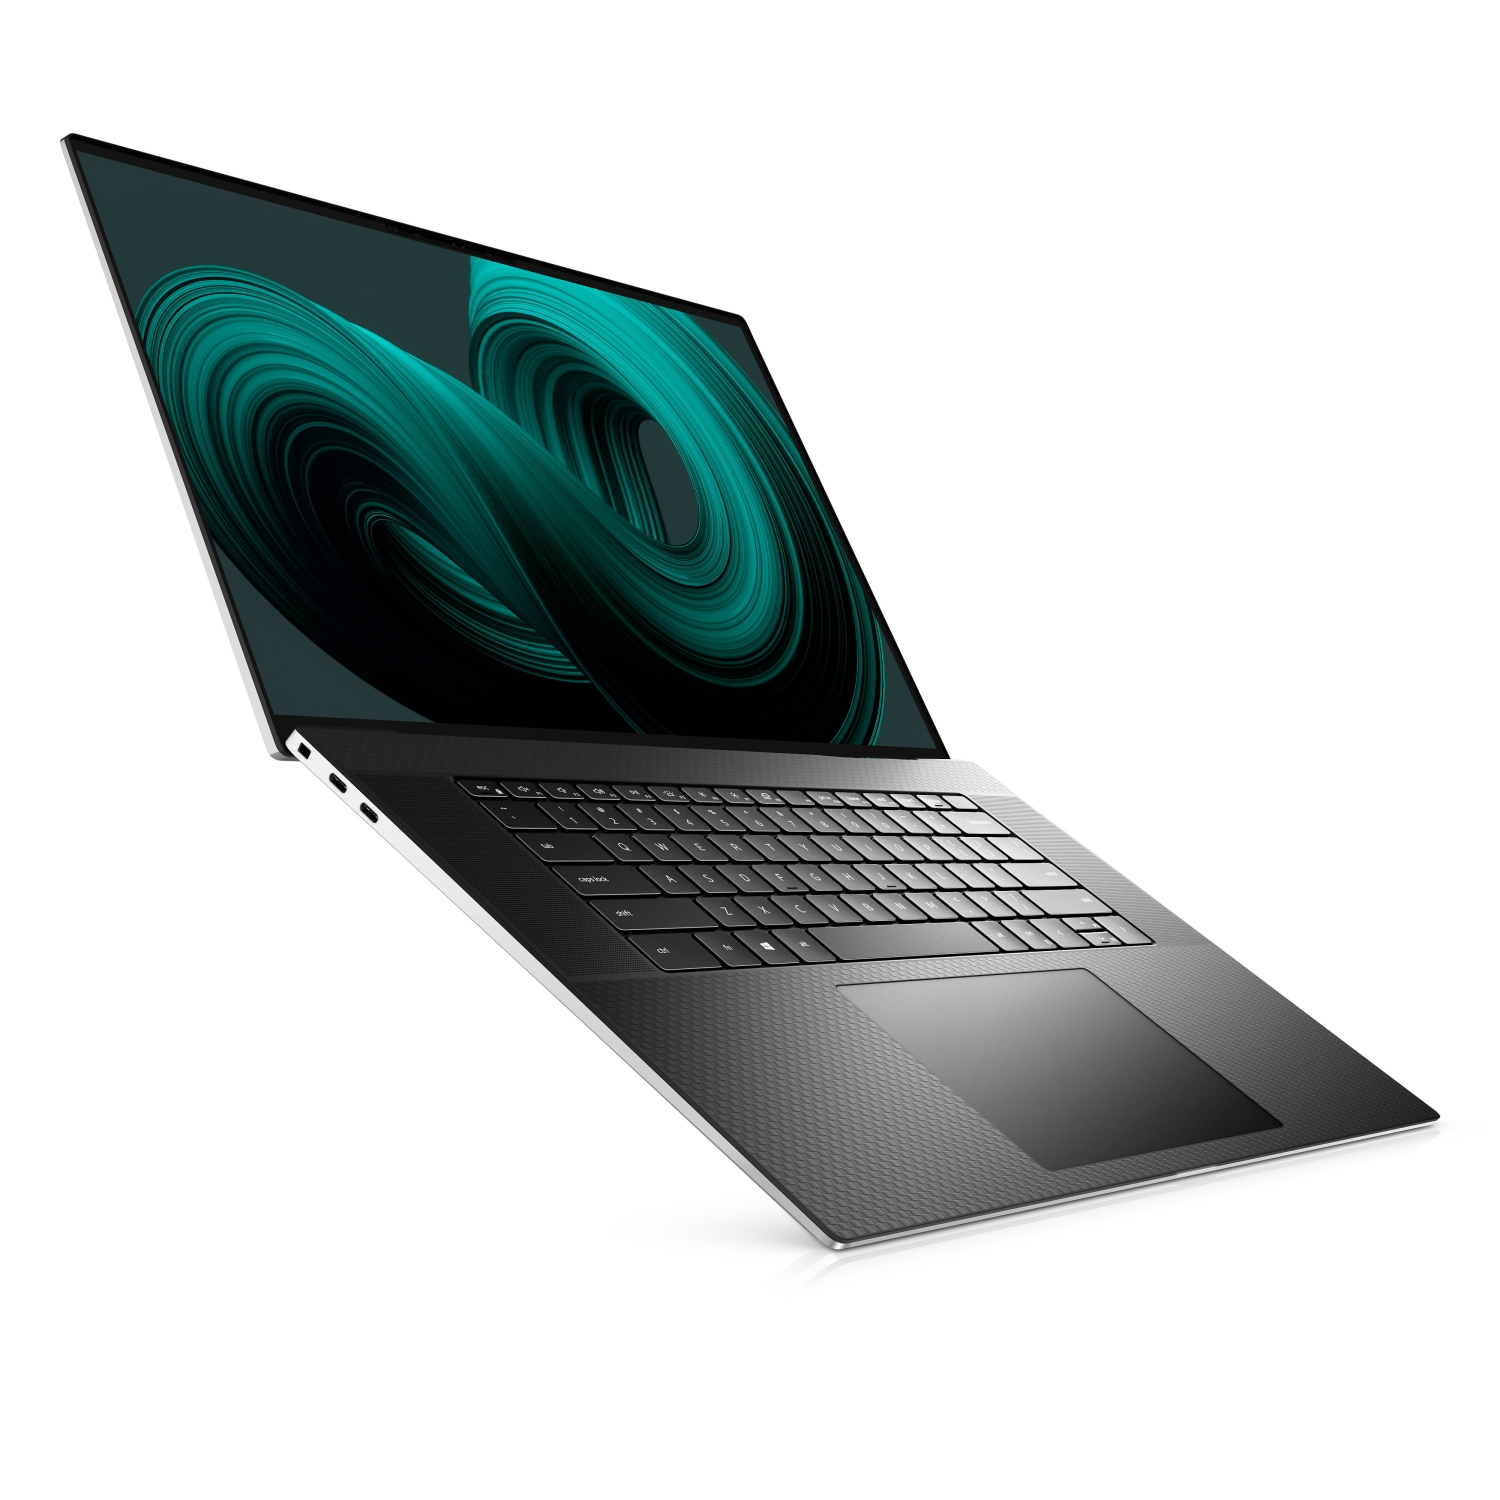 Refurbished (Excellent) - Dell XPS 17 9710 Laptop (2021) | 17" 4K Touch | Core i7 - 1TB SSD - 32GB RAM - RTX 3060 | 8 Cores @ 4.6 GHz - 11th Gen CPU Certified Refurbished